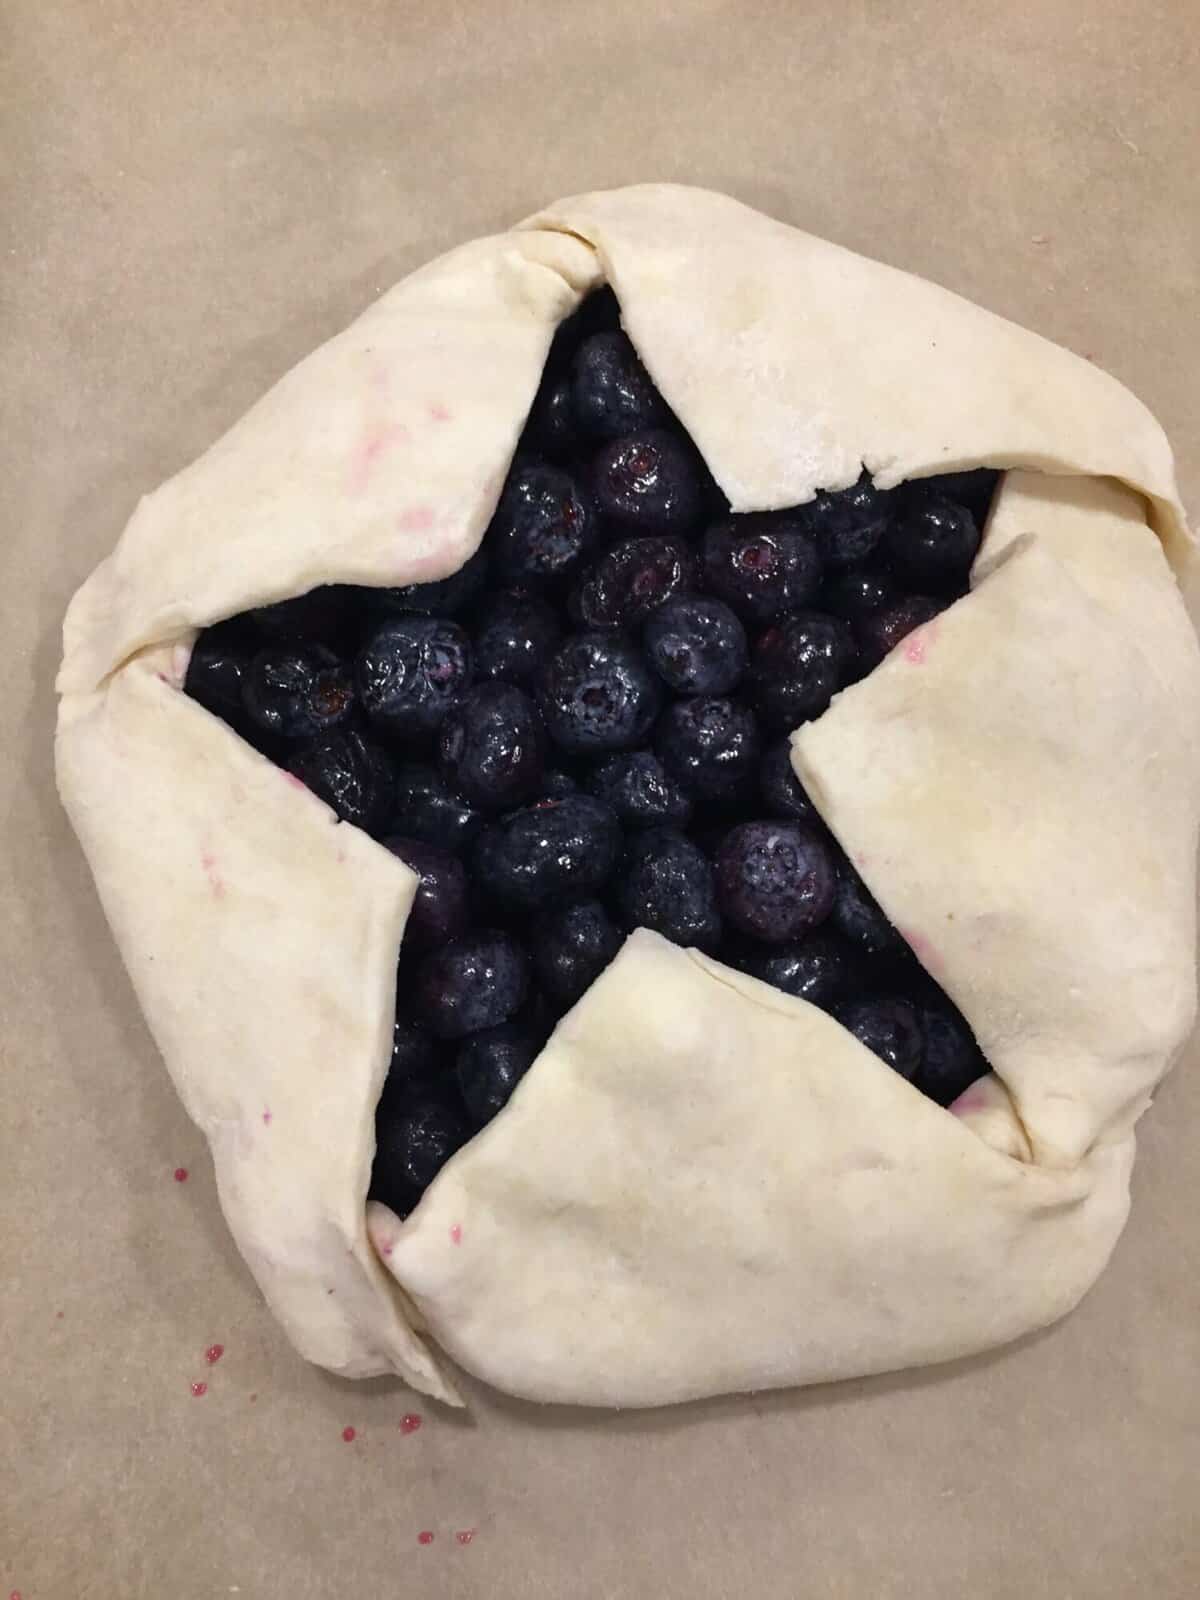 an unbaked blueberry galette with a star-shaped opening